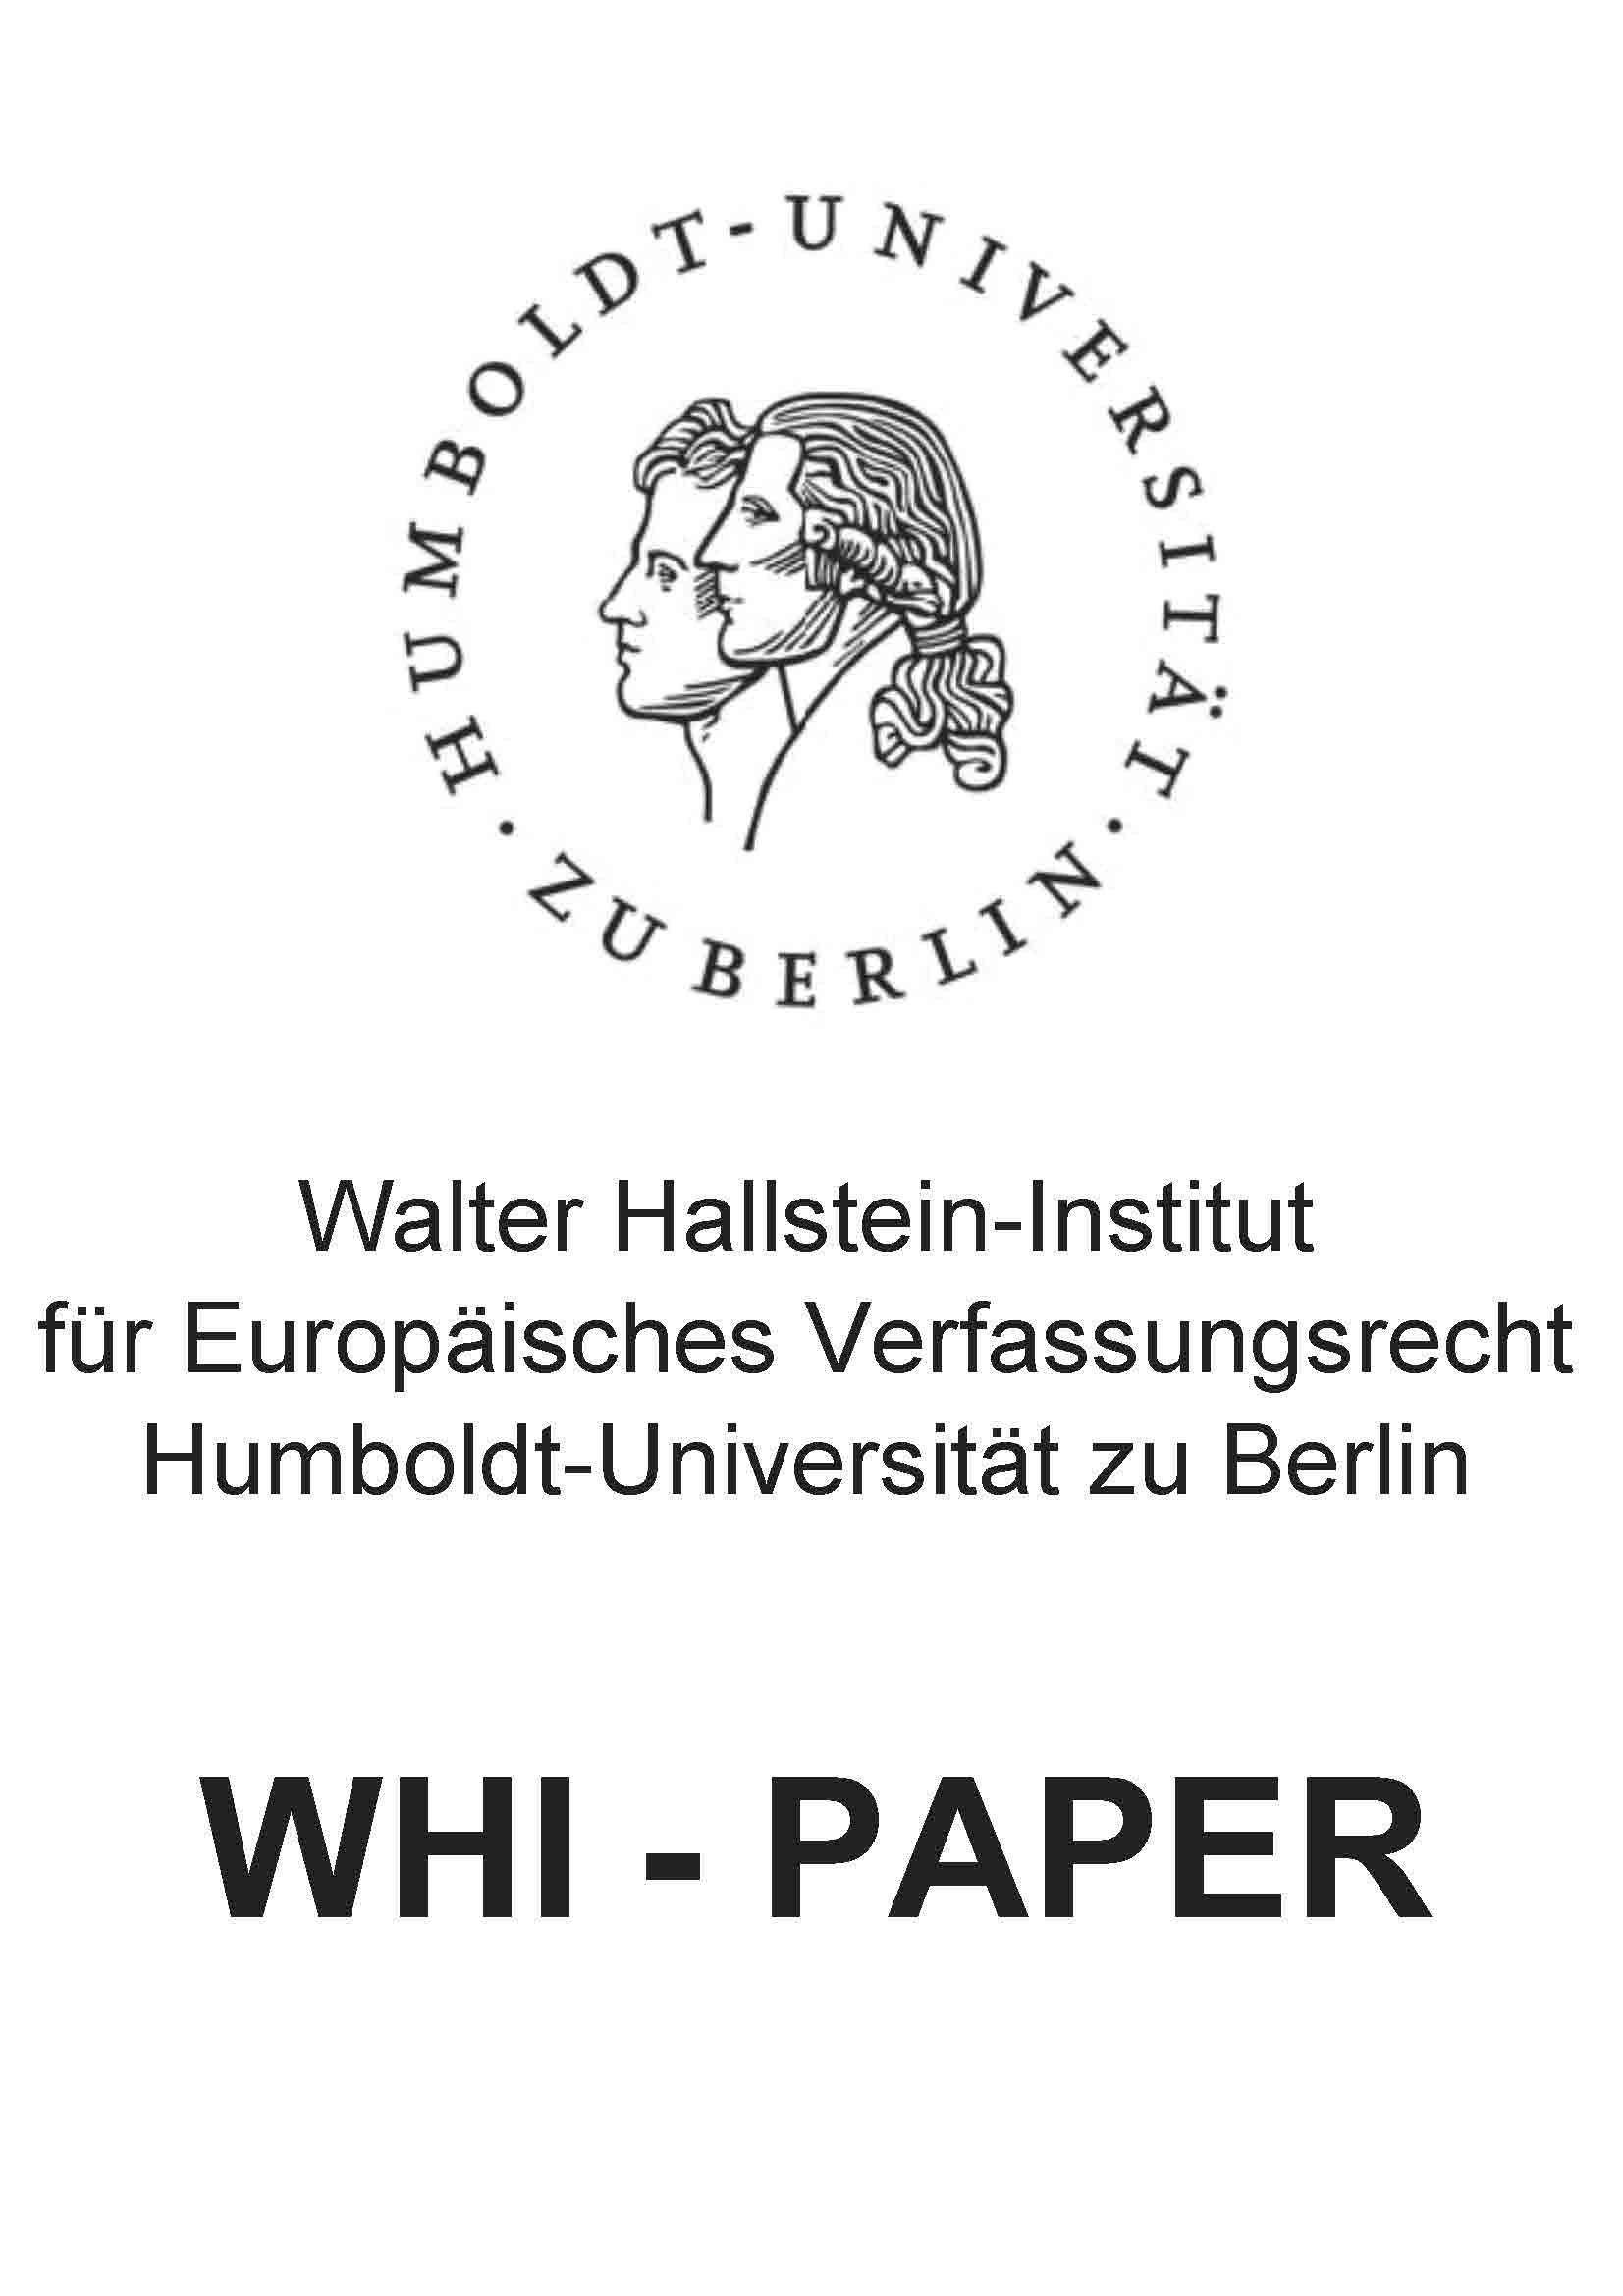 WHI Paper 01 2017